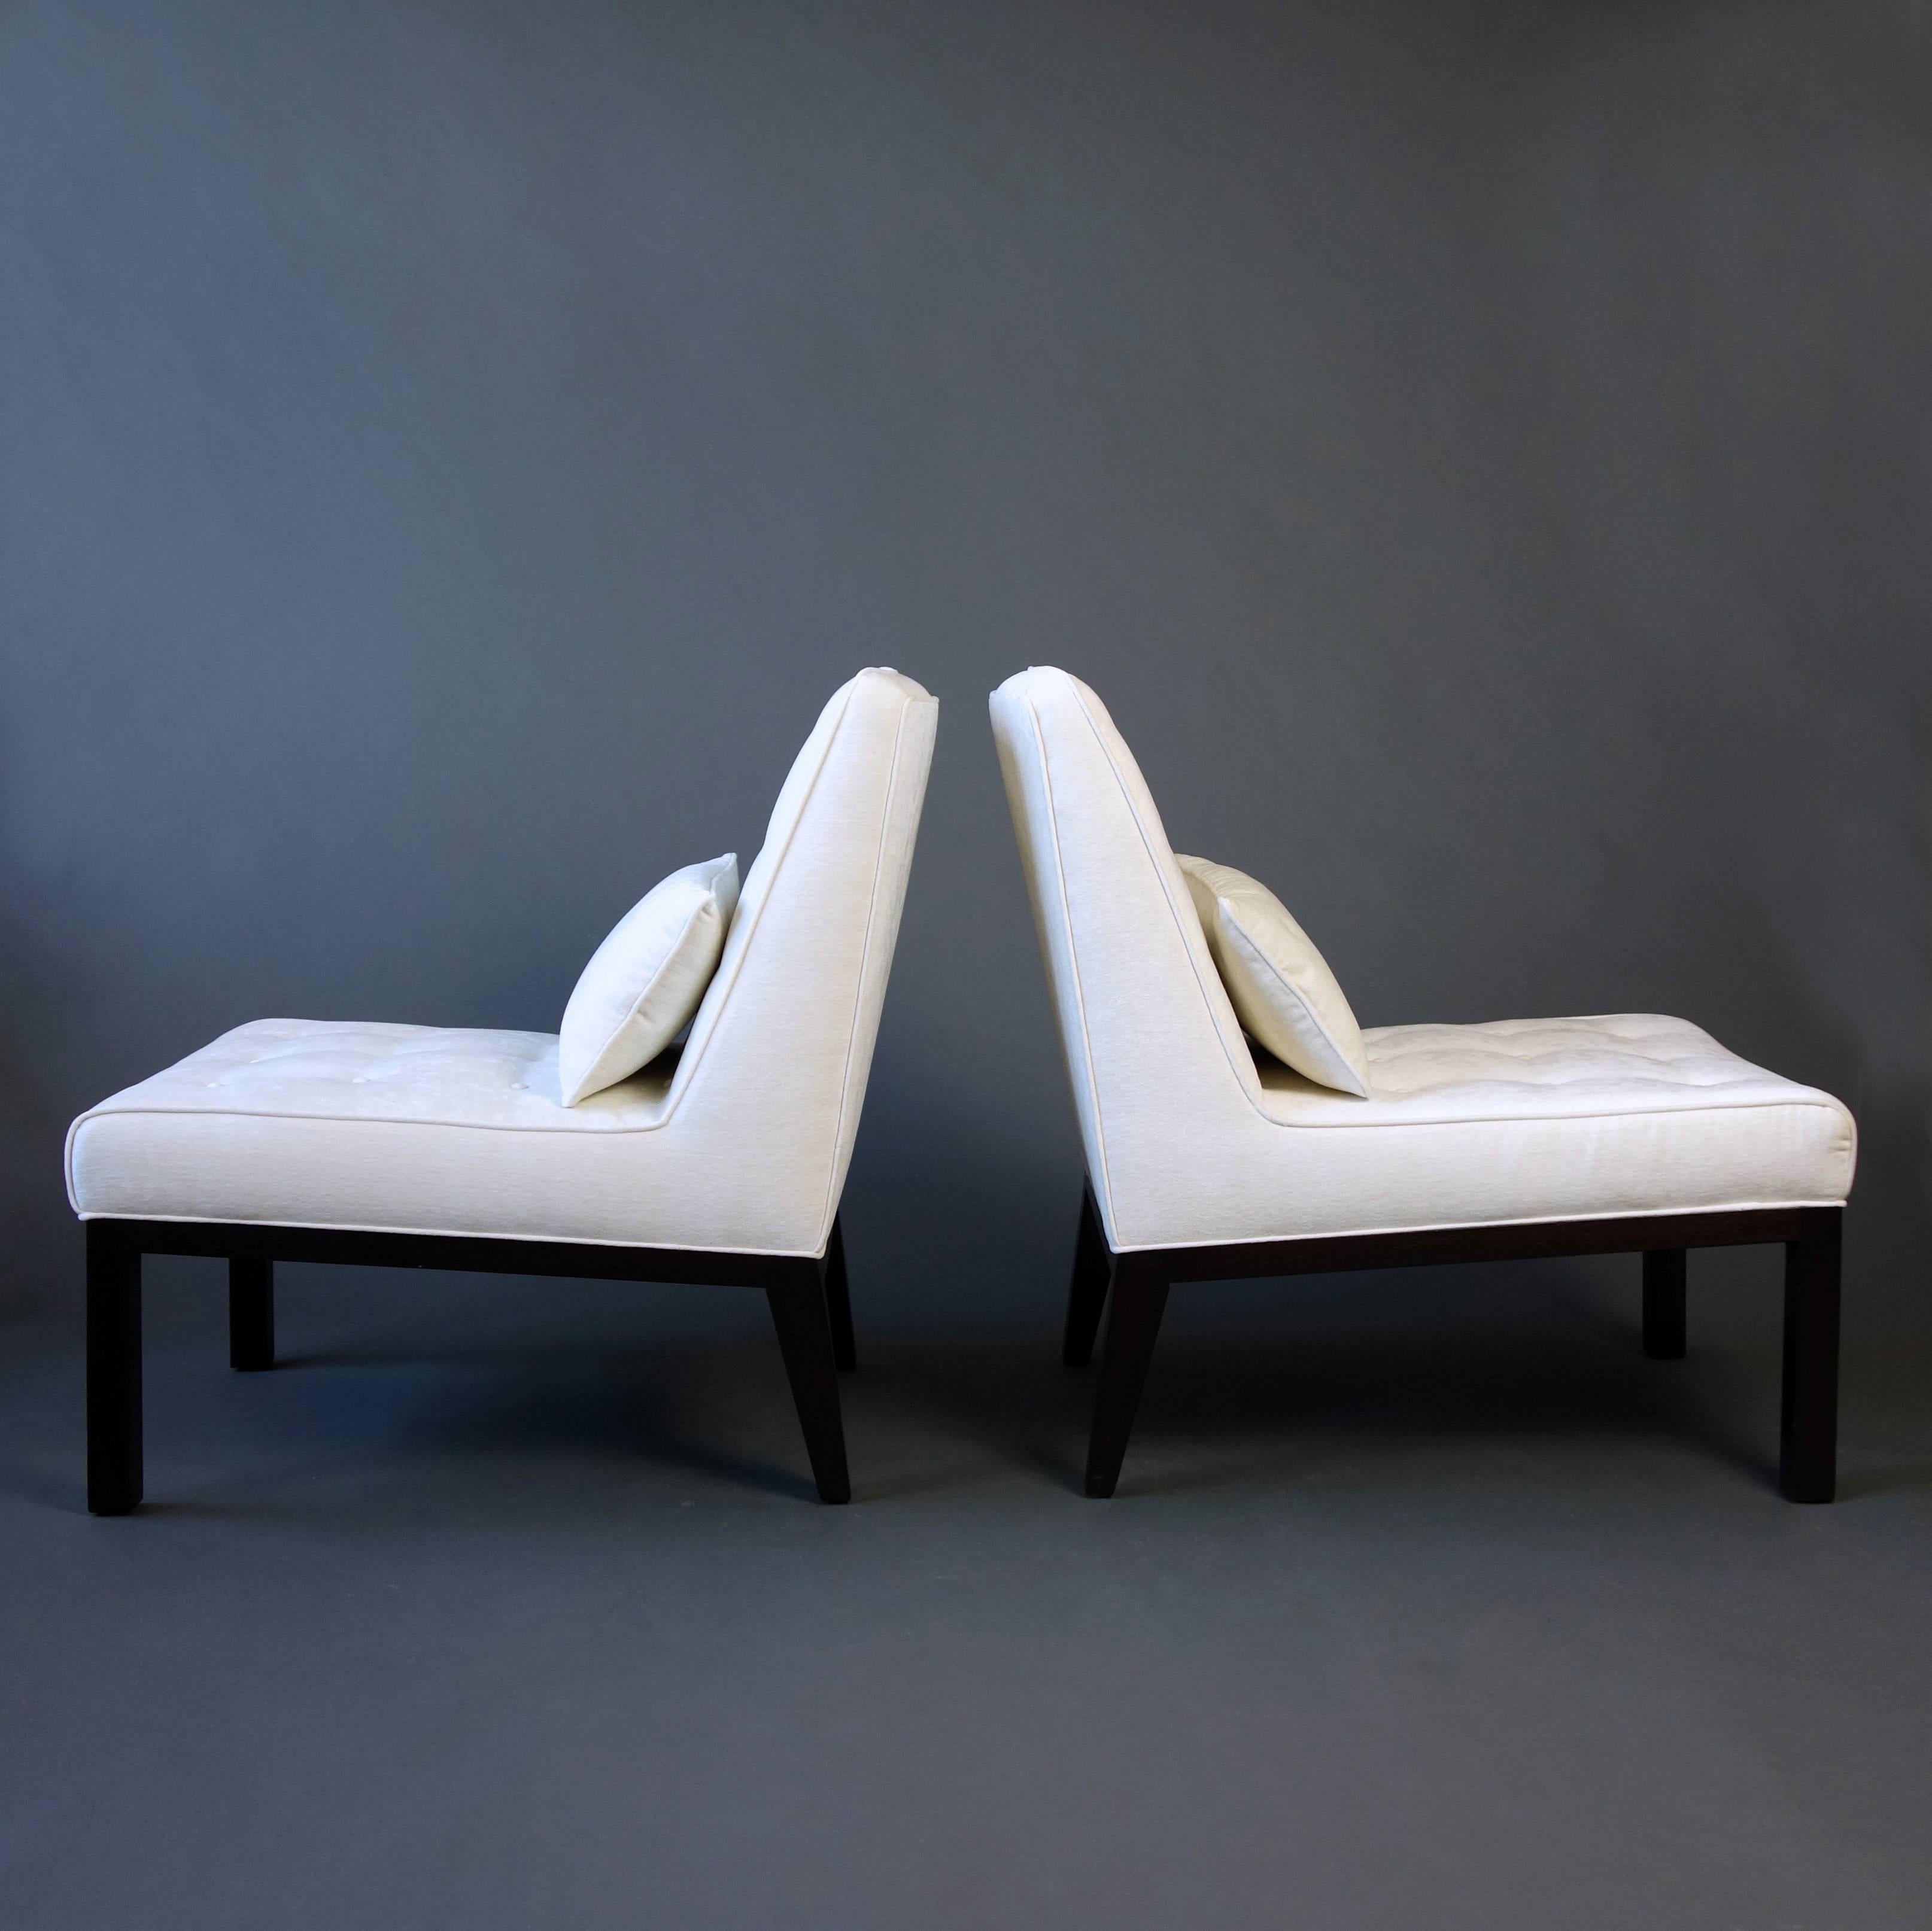 American Pair of Slipper Chairs by Edward Wormley for Dunbar